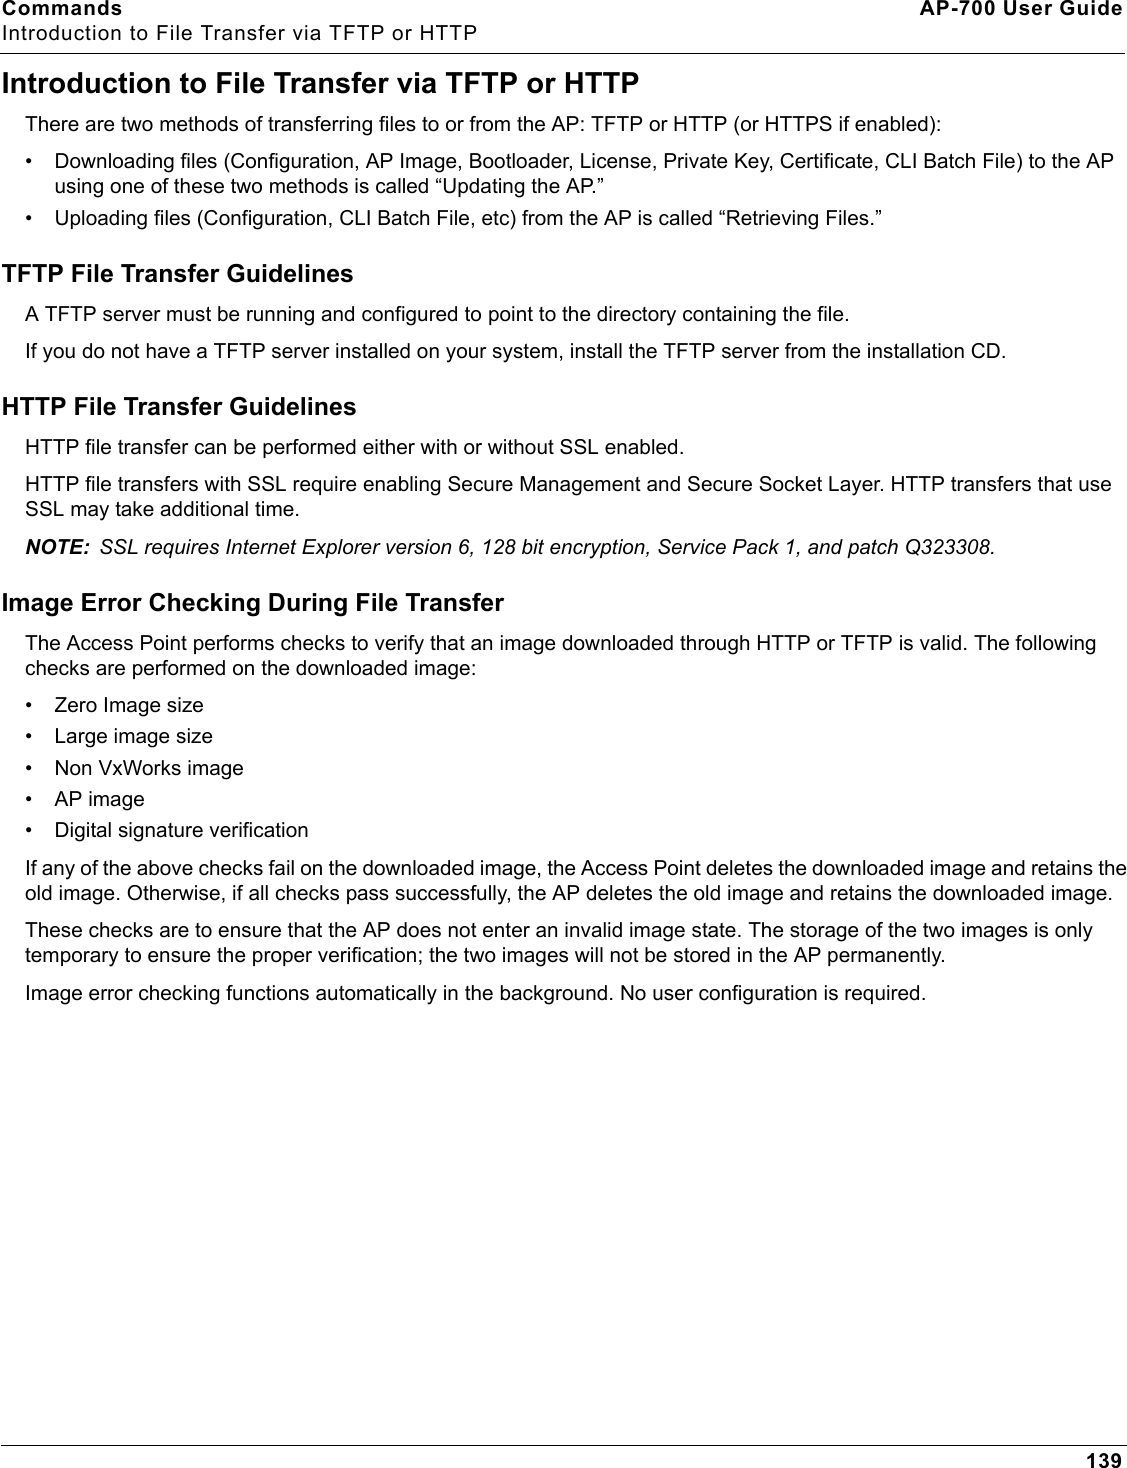 Commands AP-700 User GuideIntroduction to File Transfer via TFTP or HTTP139Introduction to File Transfer via TFTP or HTTPThere are two methods of transferring files to or from the AP: TFTP or HTTP (or HTTPS if enabled):• Downloading files (Configuration, AP Image, Bootloader, License, Private Key, Certificate, CLI Batch File) to the AP using one of these two methods is called “Updating the AP.” • Uploading files (Configuration, CLI Batch File, etc) from the AP is called “Retrieving Files.”TFTP File Transfer GuidelinesA TFTP server must be running and configured to point to the directory containing the file. If you do not have a TFTP server installed on your system, install the TFTP server from the installation CD.HTTP File Transfer GuidelinesHTTP file transfer can be performed either with or without SSL enabled.HTTP file transfers with SSL require enabling Secure Management and Secure Socket Layer. HTTP transfers that use SSL may take additional time.NOTE: SSL requires Internet Explorer version 6, 128 bit encryption, Service Pack 1, and patch Q323308.Image Error Checking During File TransferThe Access Point performs checks to verify that an image downloaded through HTTP or TFTP is valid. The following checks are performed on the downloaded image:• Zero Image size• Large image size• Non VxWorks image• AP image• Digital signature verificationIf any of the above checks fail on the downloaded image, the Access Point deletes the downloaded image and retains the old image. Otherwise, if all checks pass successfully, the AP deletes the old image and retains the downloaded image. These checks are to ensure that the AP does not enter an invalid image state. The storage of the two images is only temporary to ensure the proper verification; the two images will not be stored in the AP permanently.Image error checking functions automatically in the background. No user configuration is required.